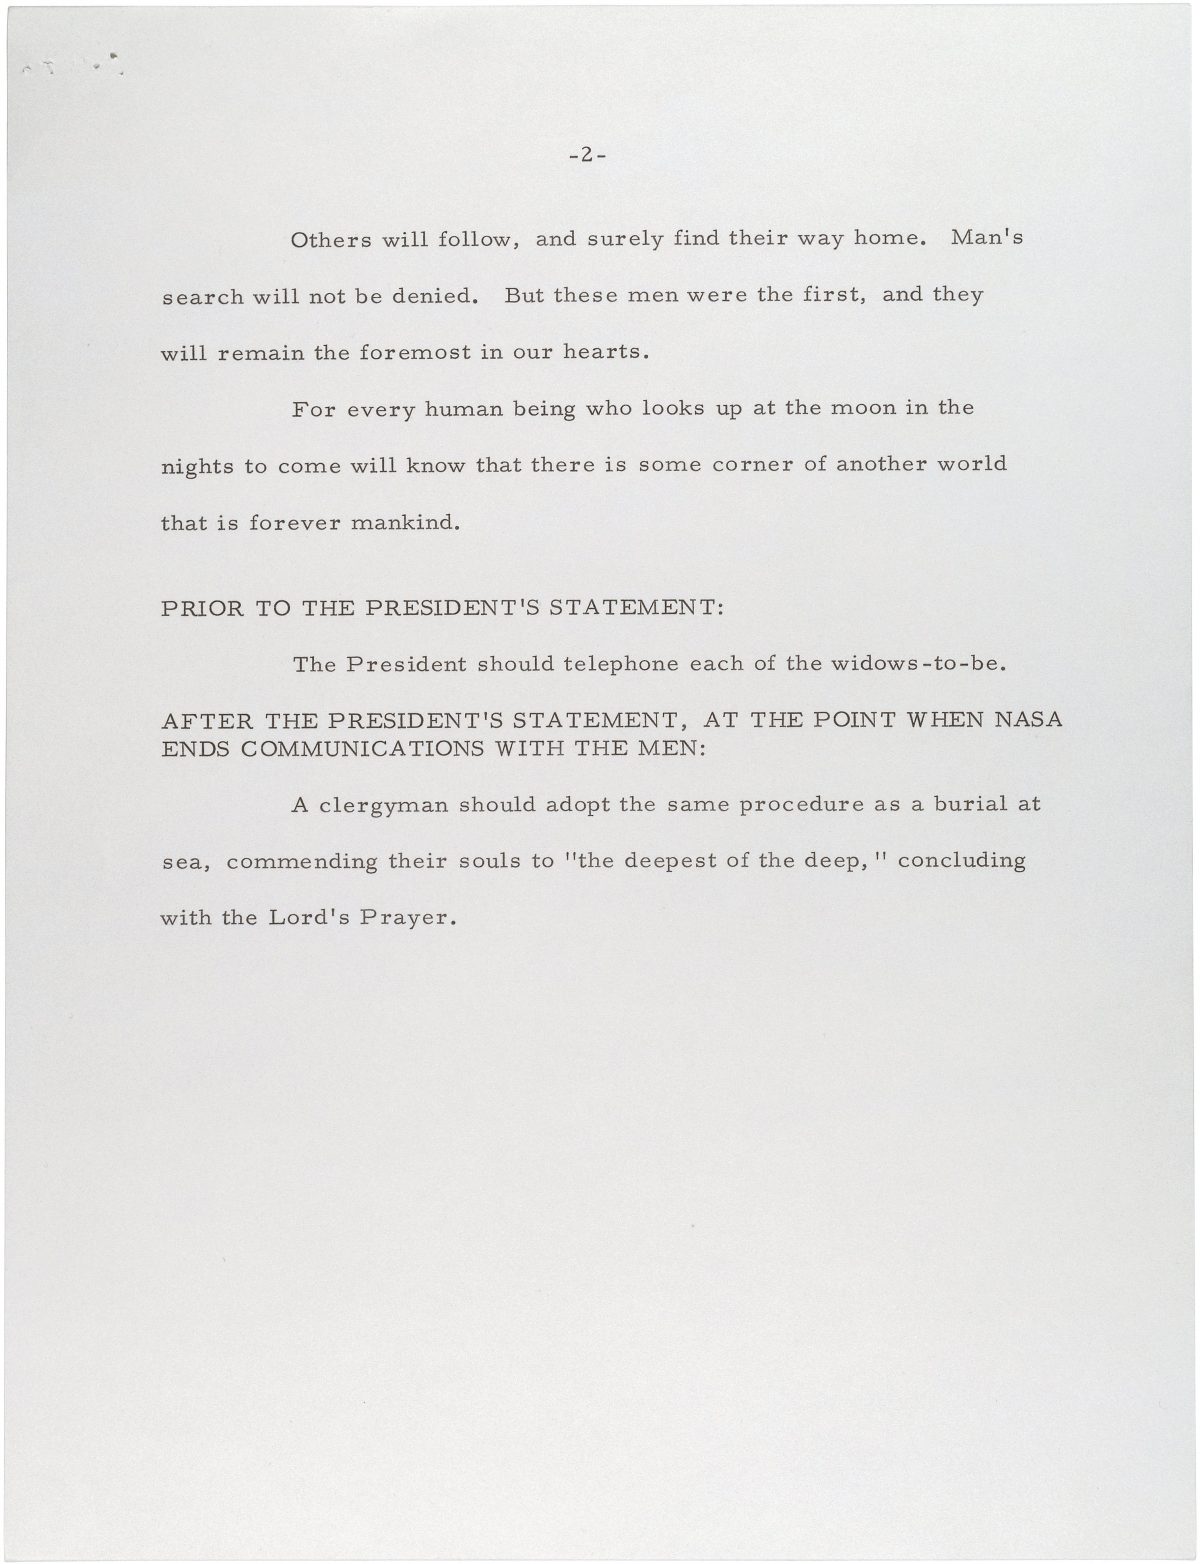 Statement for President Nixon to read in case the astronauts were stranded on the Moon, July 18, 1969.